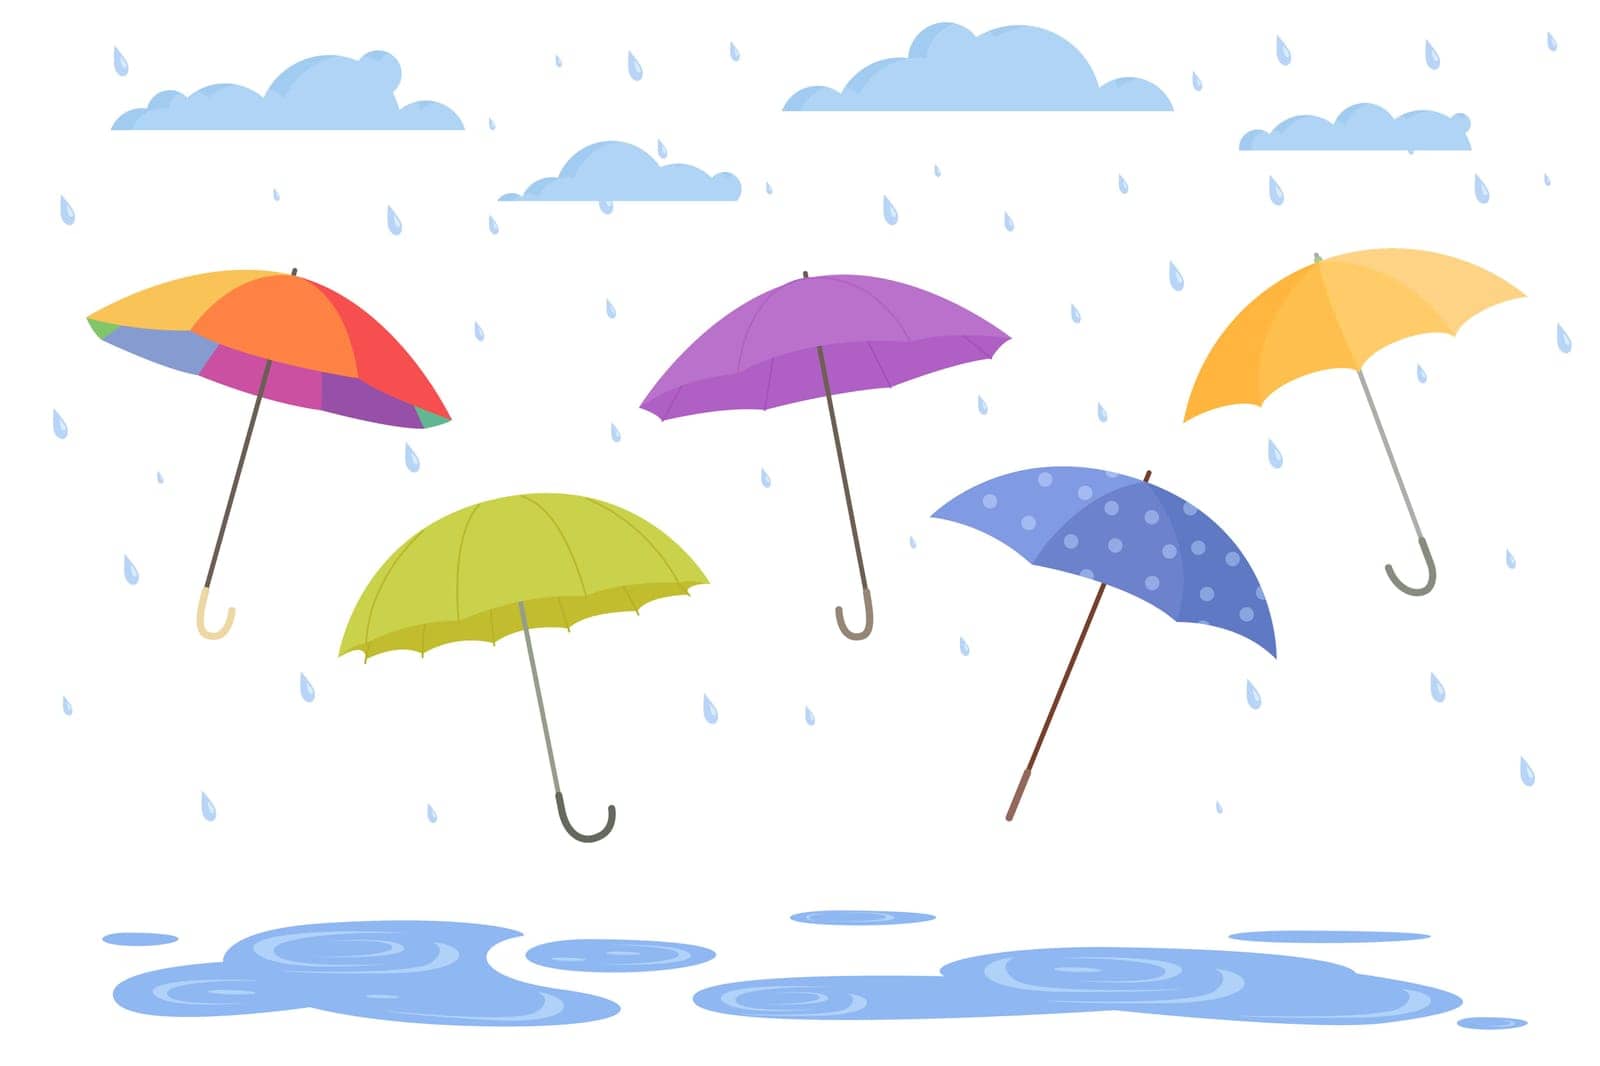 Open umbrella set to protect from rain vector illustration. Cartoon isolated parasols in different colors with handles and waterproof fabric, accessory for protection against raindrops from clouds